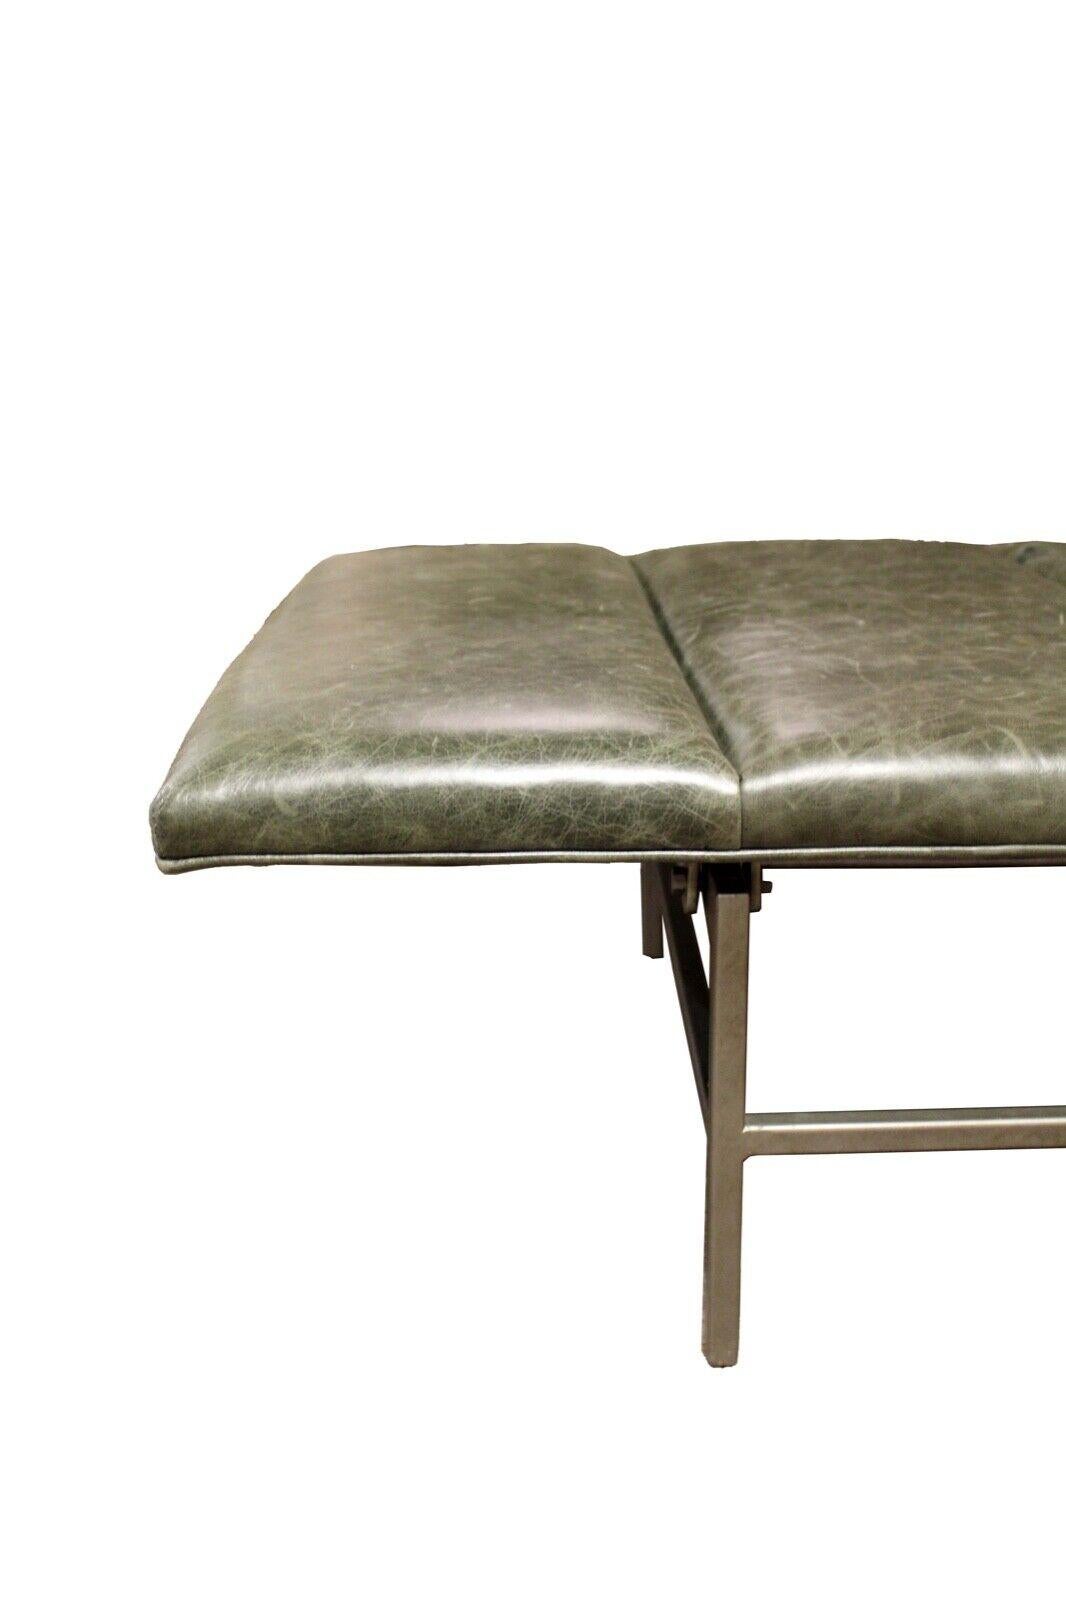 For your consideration is this Bernhardt metal & leather Ardmore bench. 

Dimensions: 70w x 28d x 14.5h.